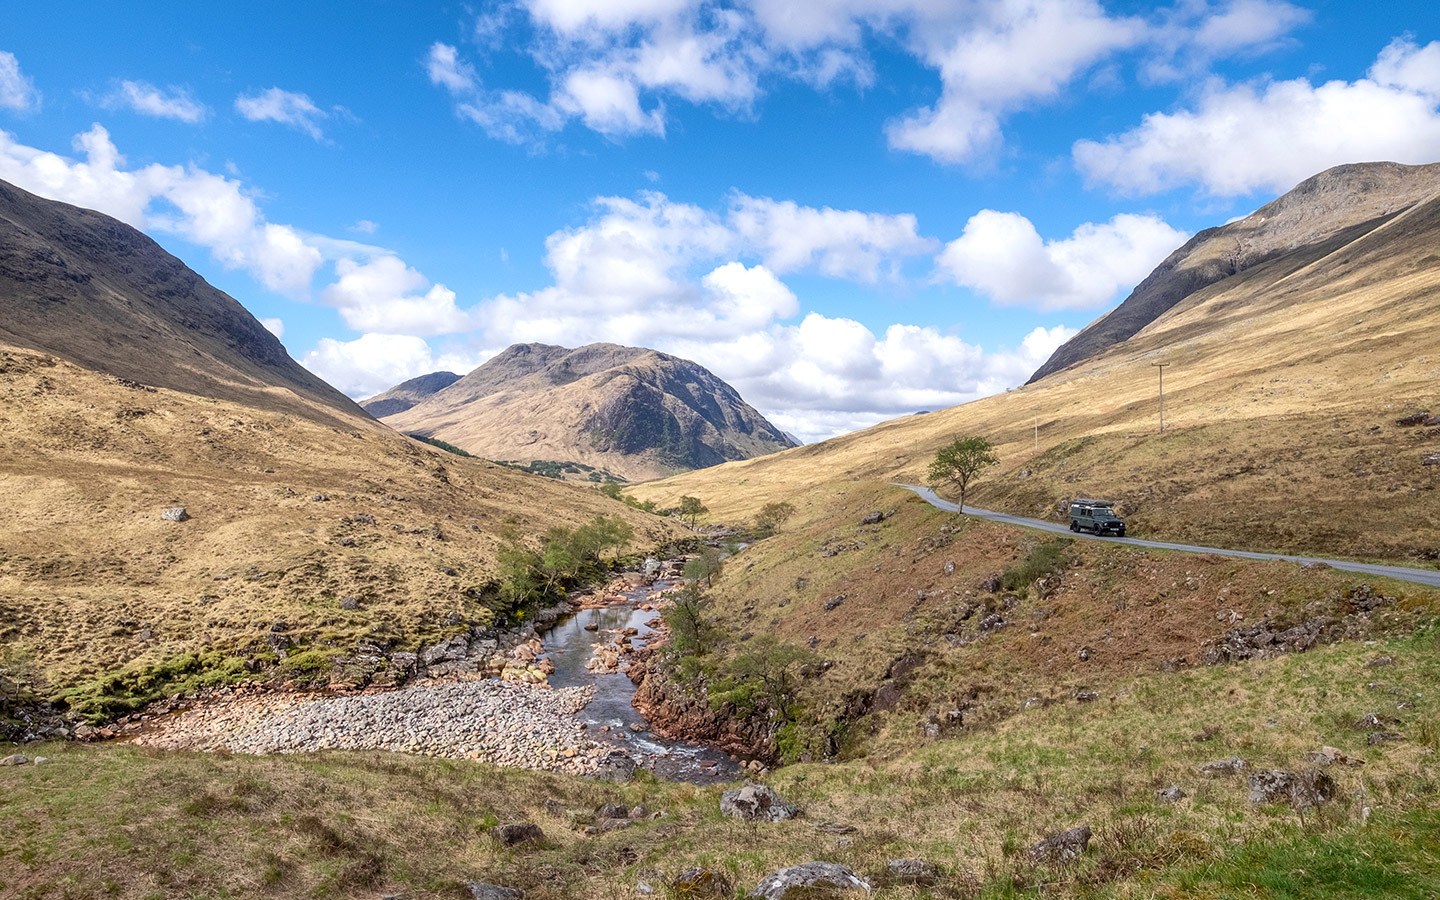 Glen Etive road: One of Scotland’s most beautiful drives